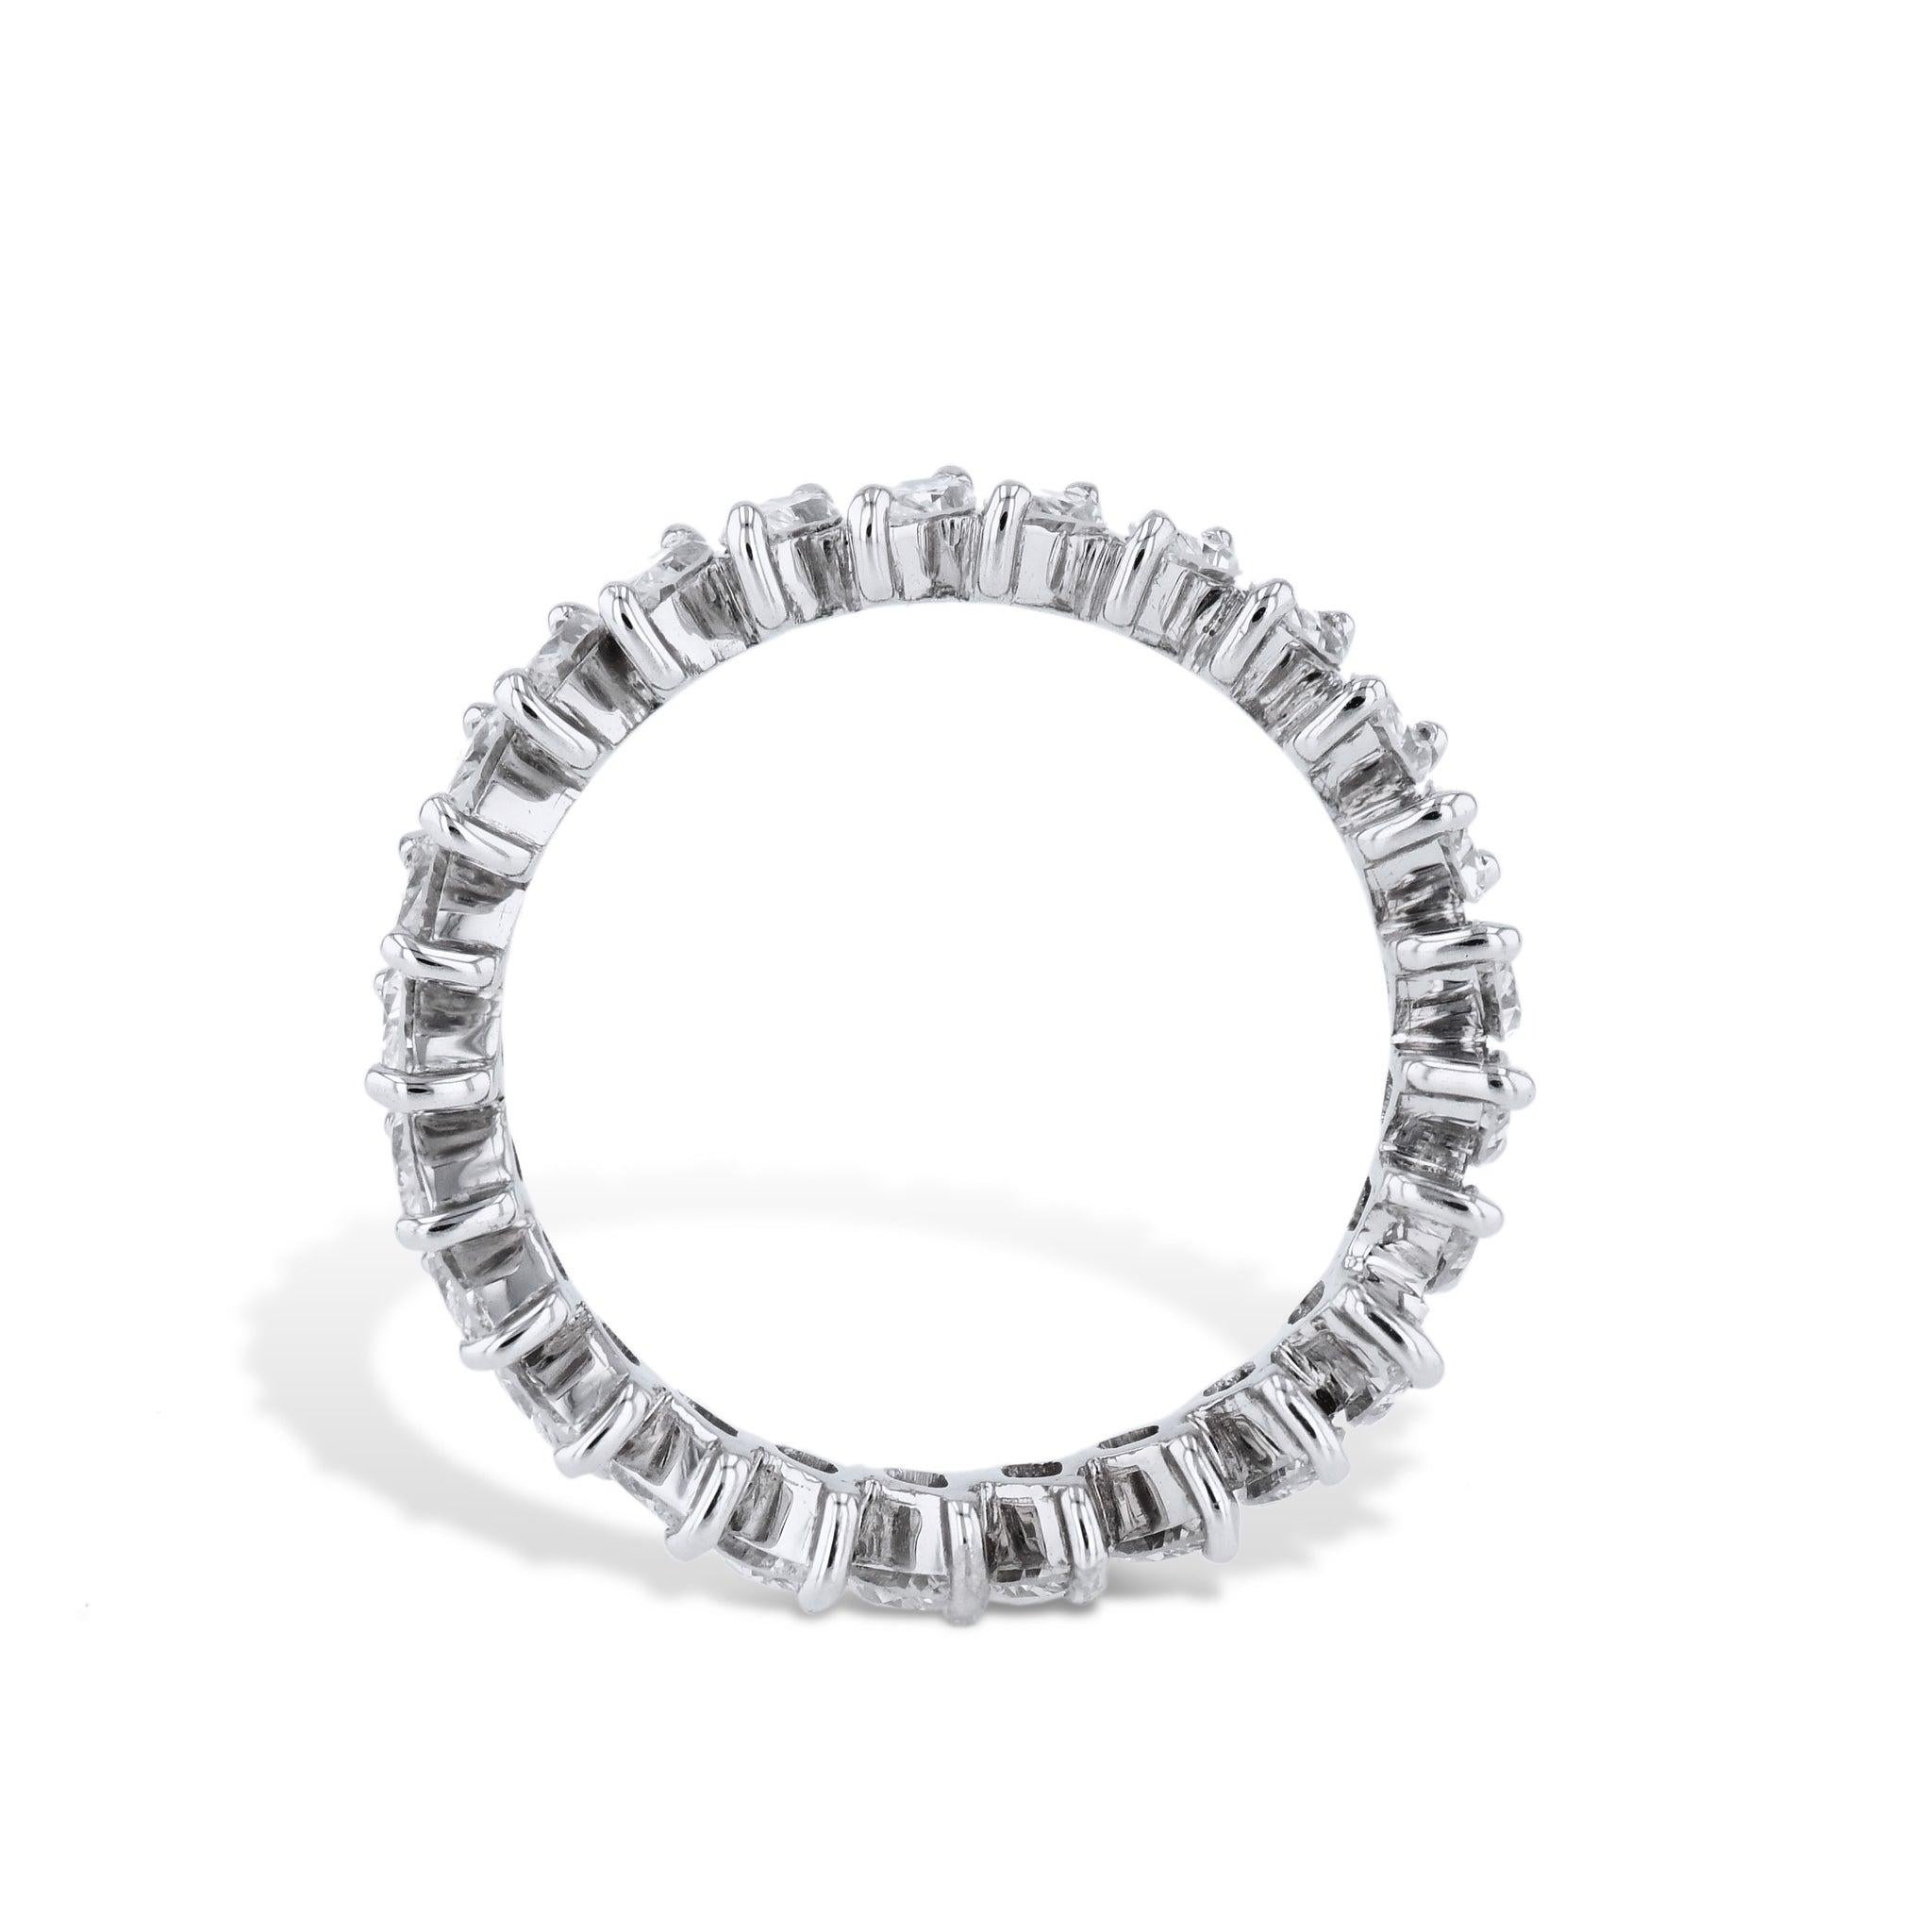 Be captivated by the luxurious beauty and exquisite allure of this Marquise Diamond Platinum Estate Eternity Band. Adorned with Marquise cut diamonds set at an angle. This size 6.5 Estate Ring is the perfect symbol of love, beauty, and